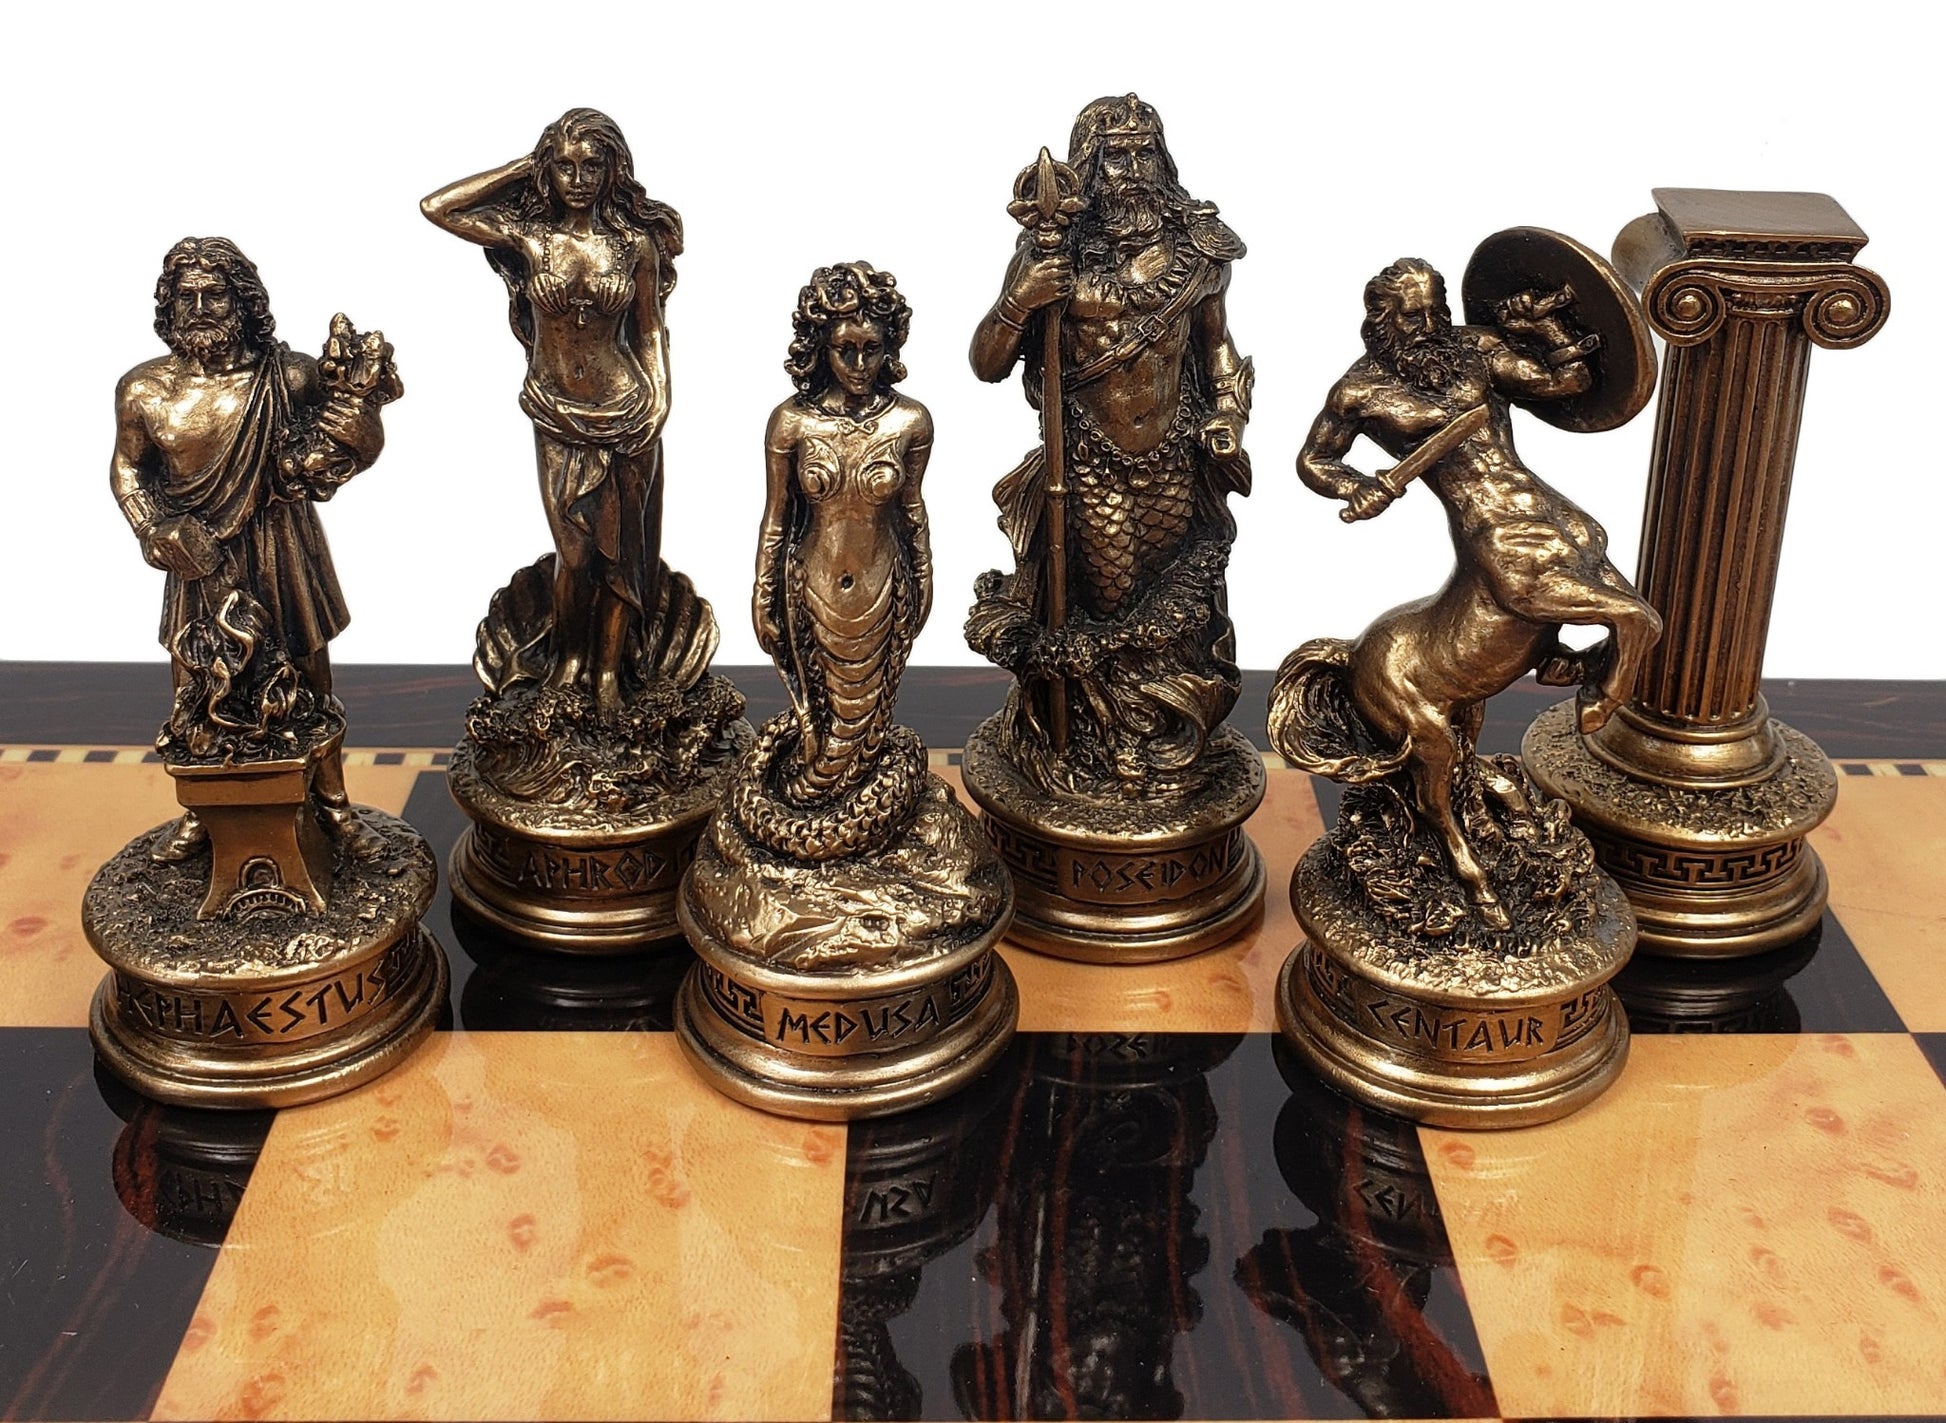 Large Chess Set Greek Mythology Characters Statue Sculpture Chess Board  Decor